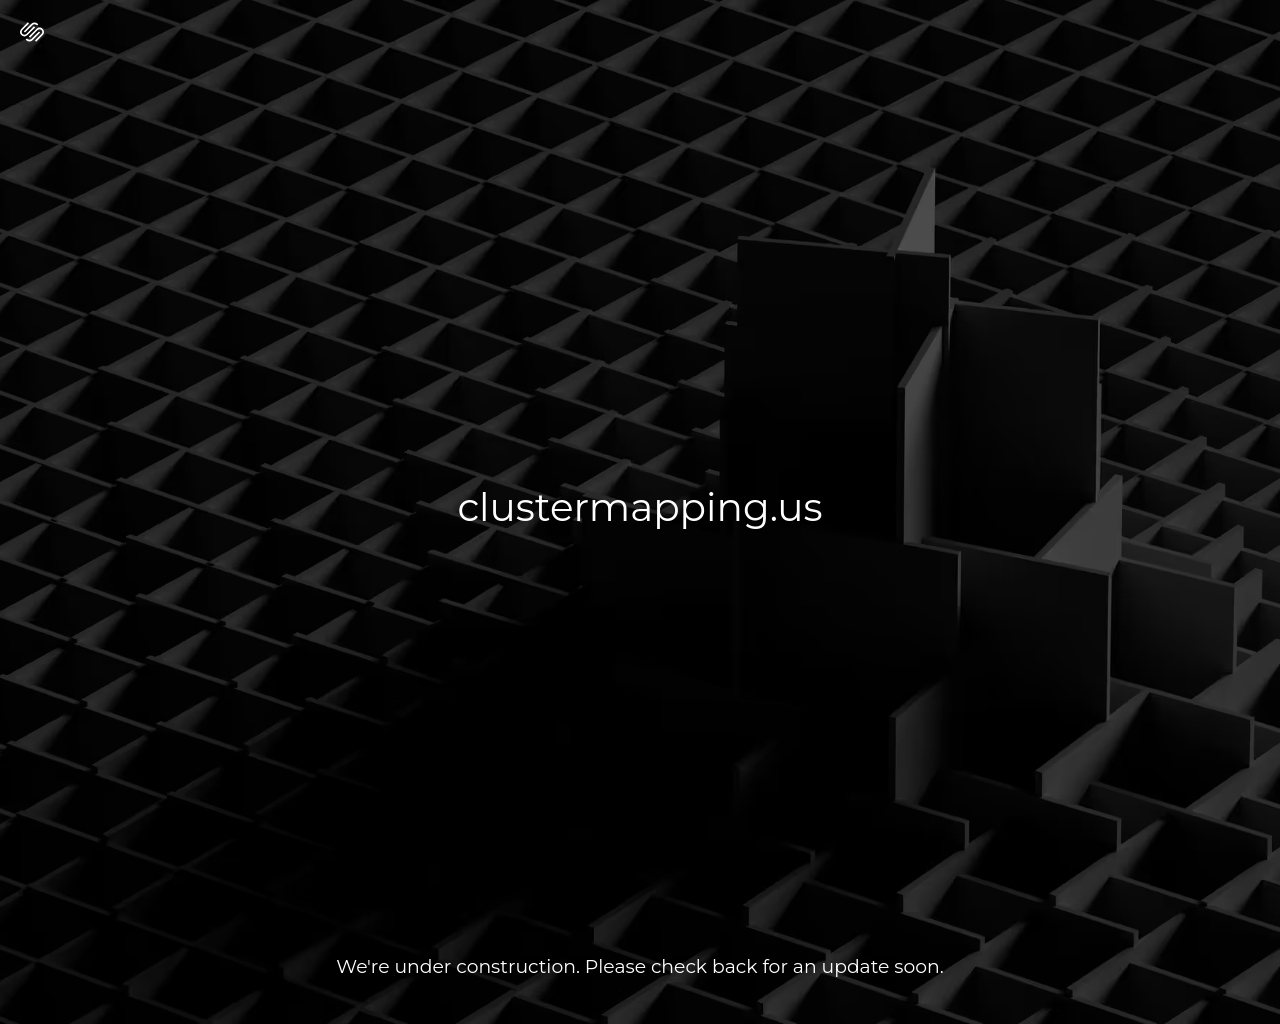 clustermapping.us